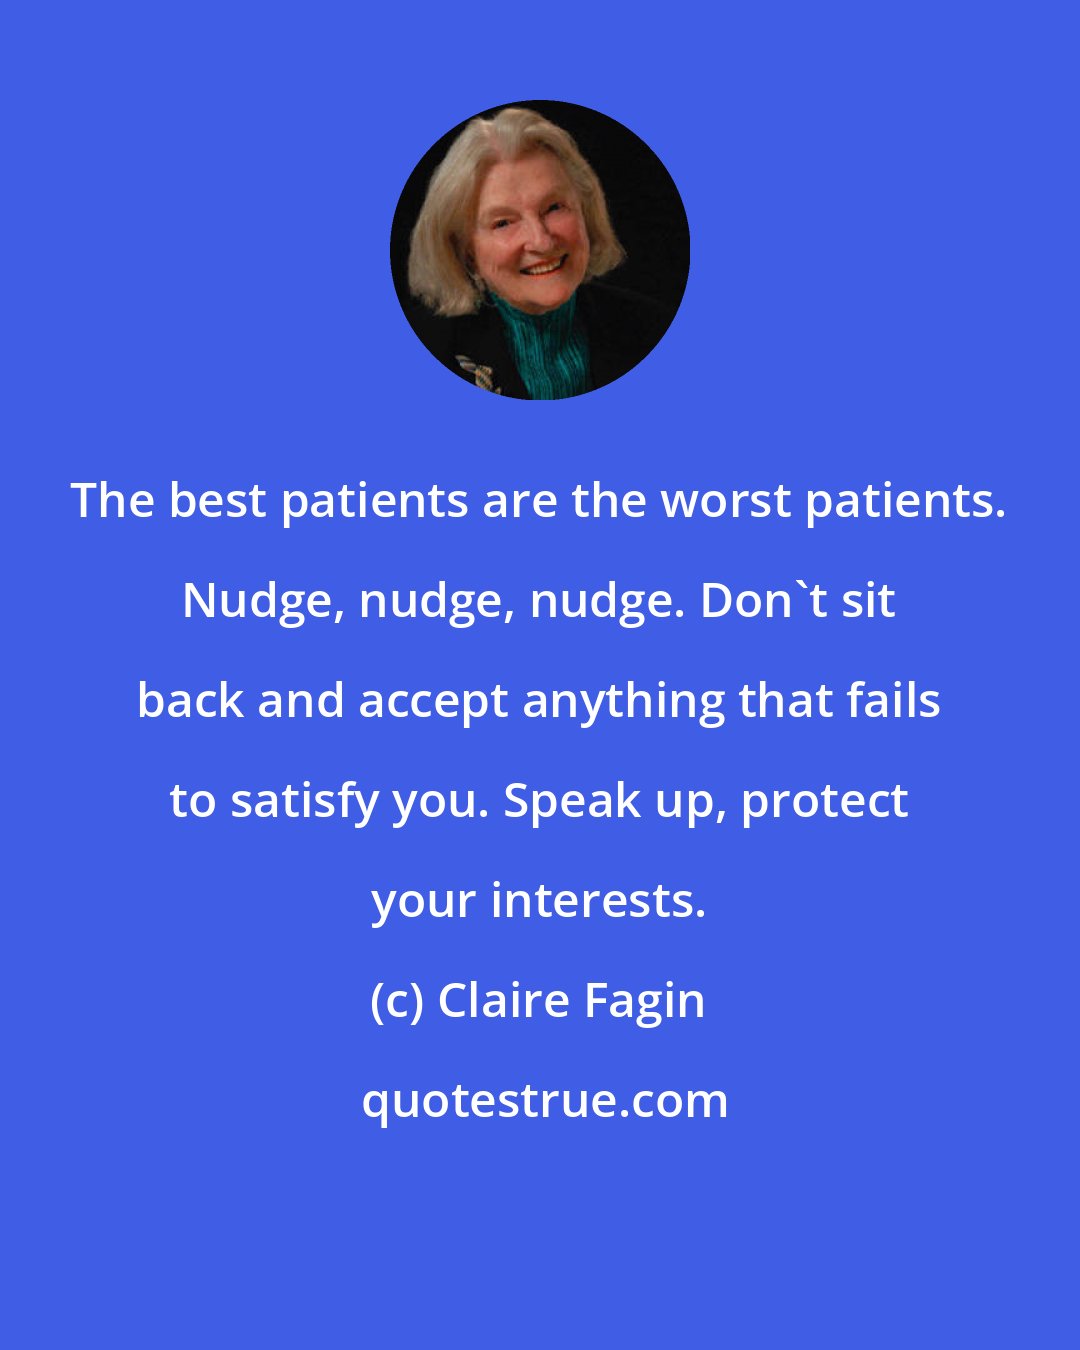 Claire Fagin: The best patients are the worst patients. Nudge, nudge, nudge. Don't sit back and accept anything that fails to satisfy you. Speak up, protect your interests.